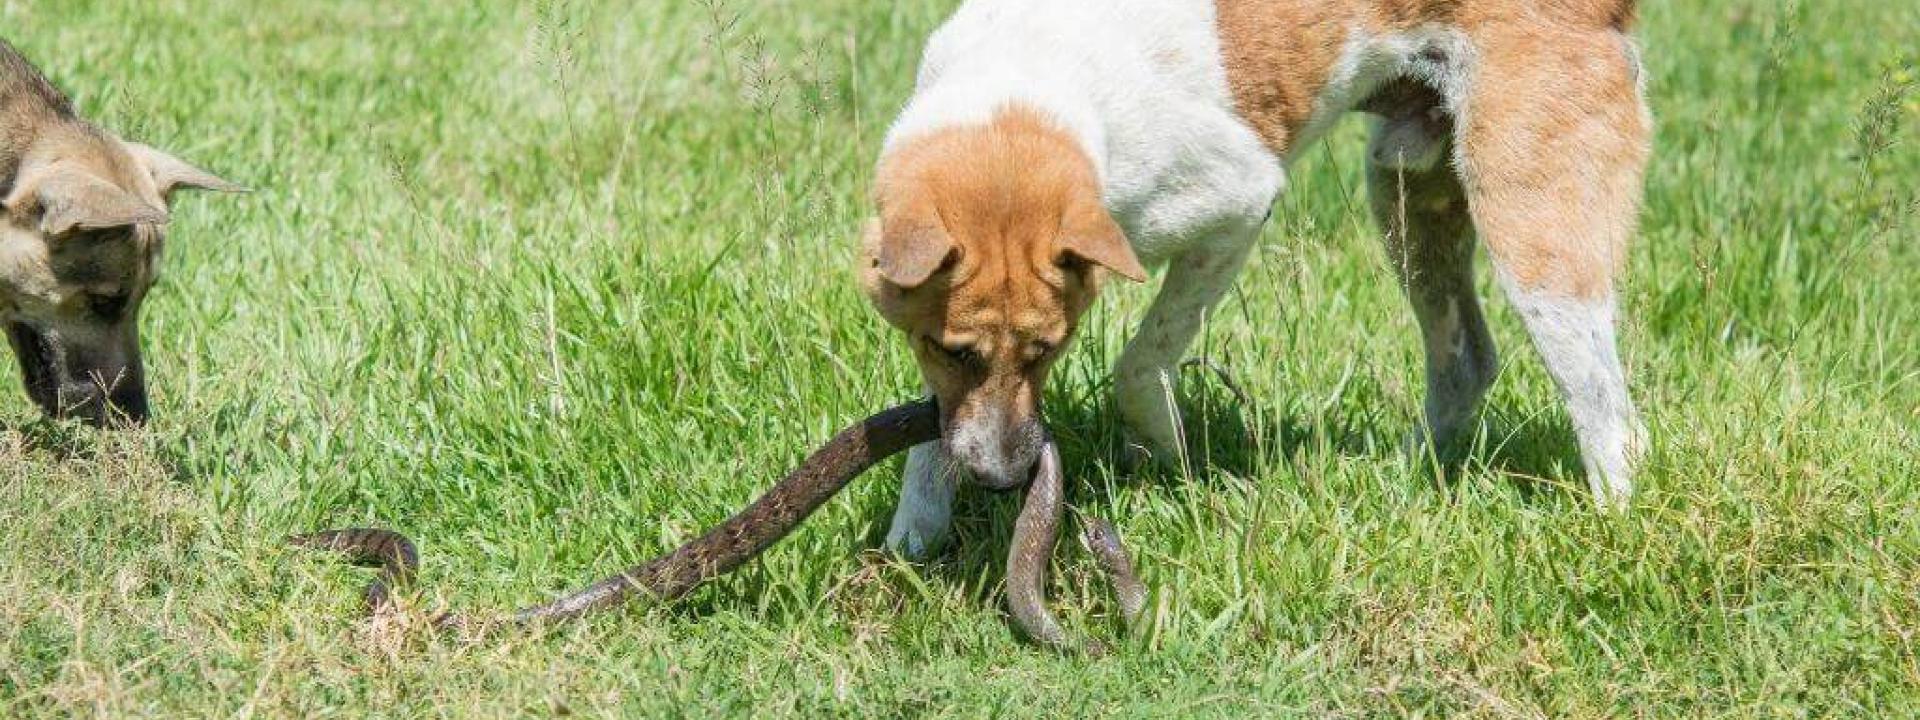 protect dogs from snake bites